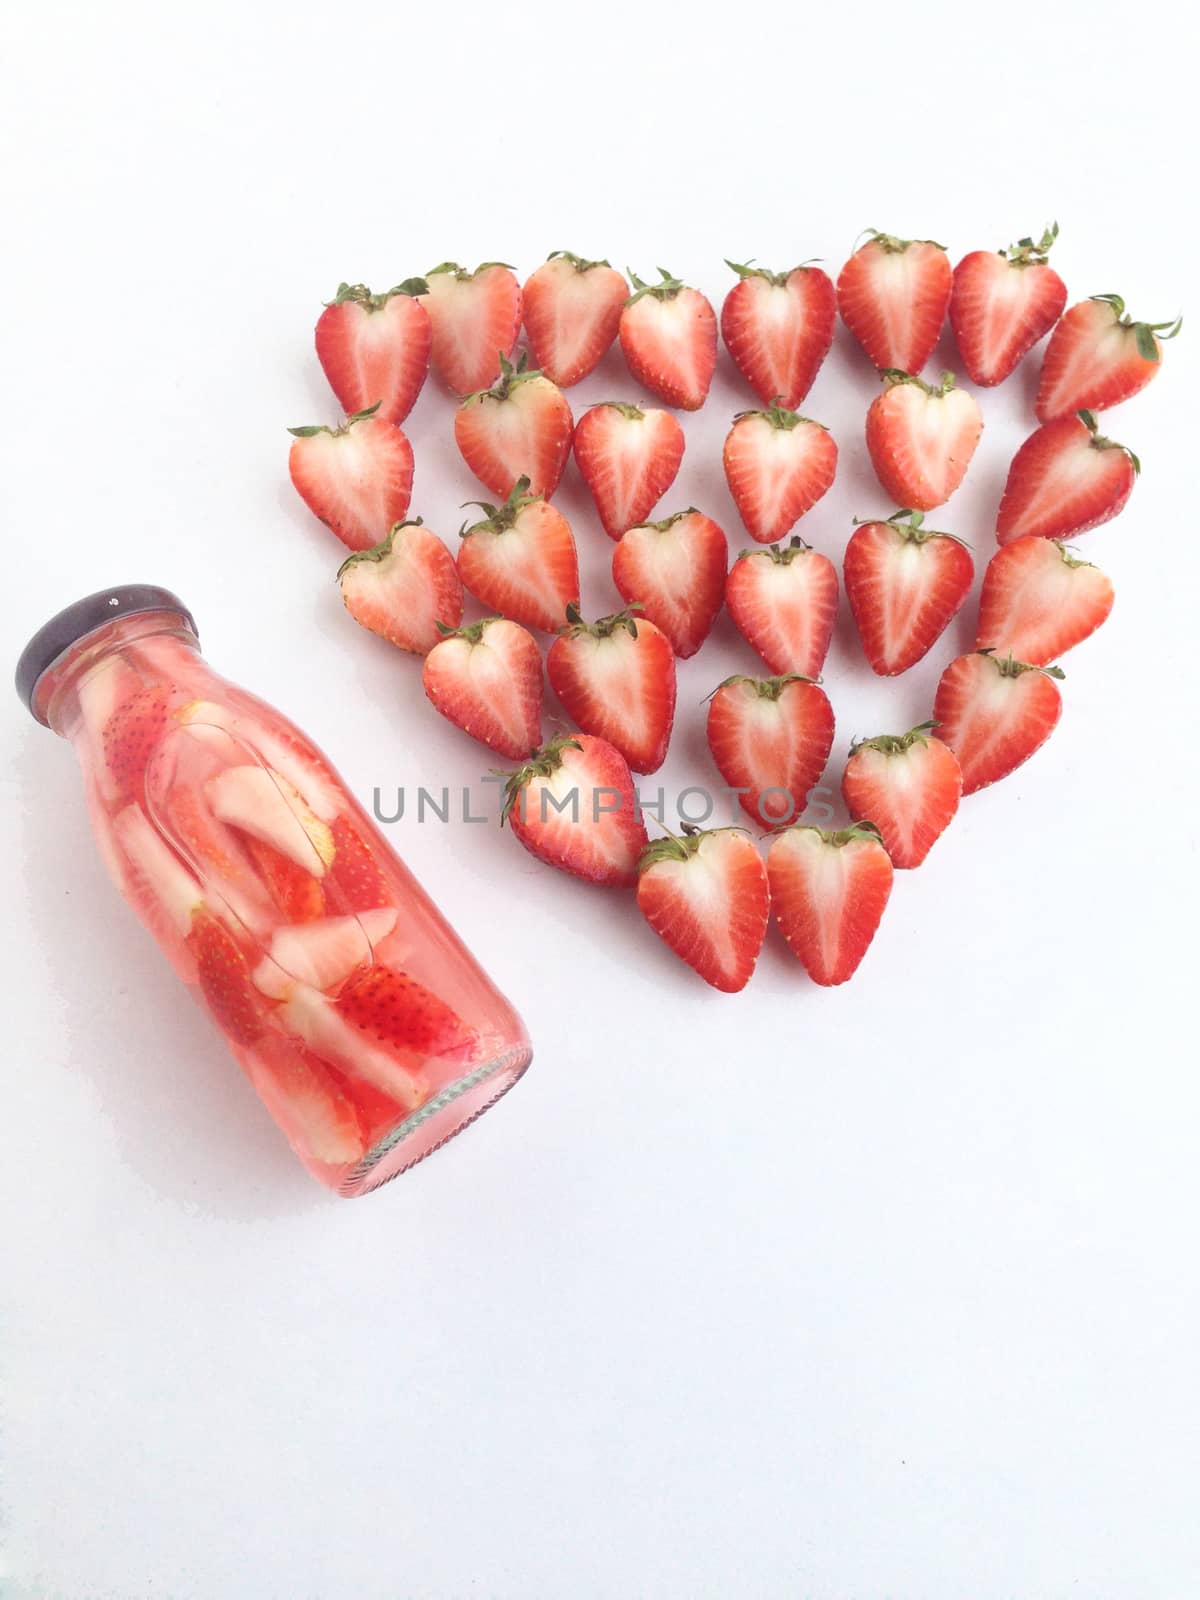 strawberry drinks and strawberry heart shaped by Bowonpat